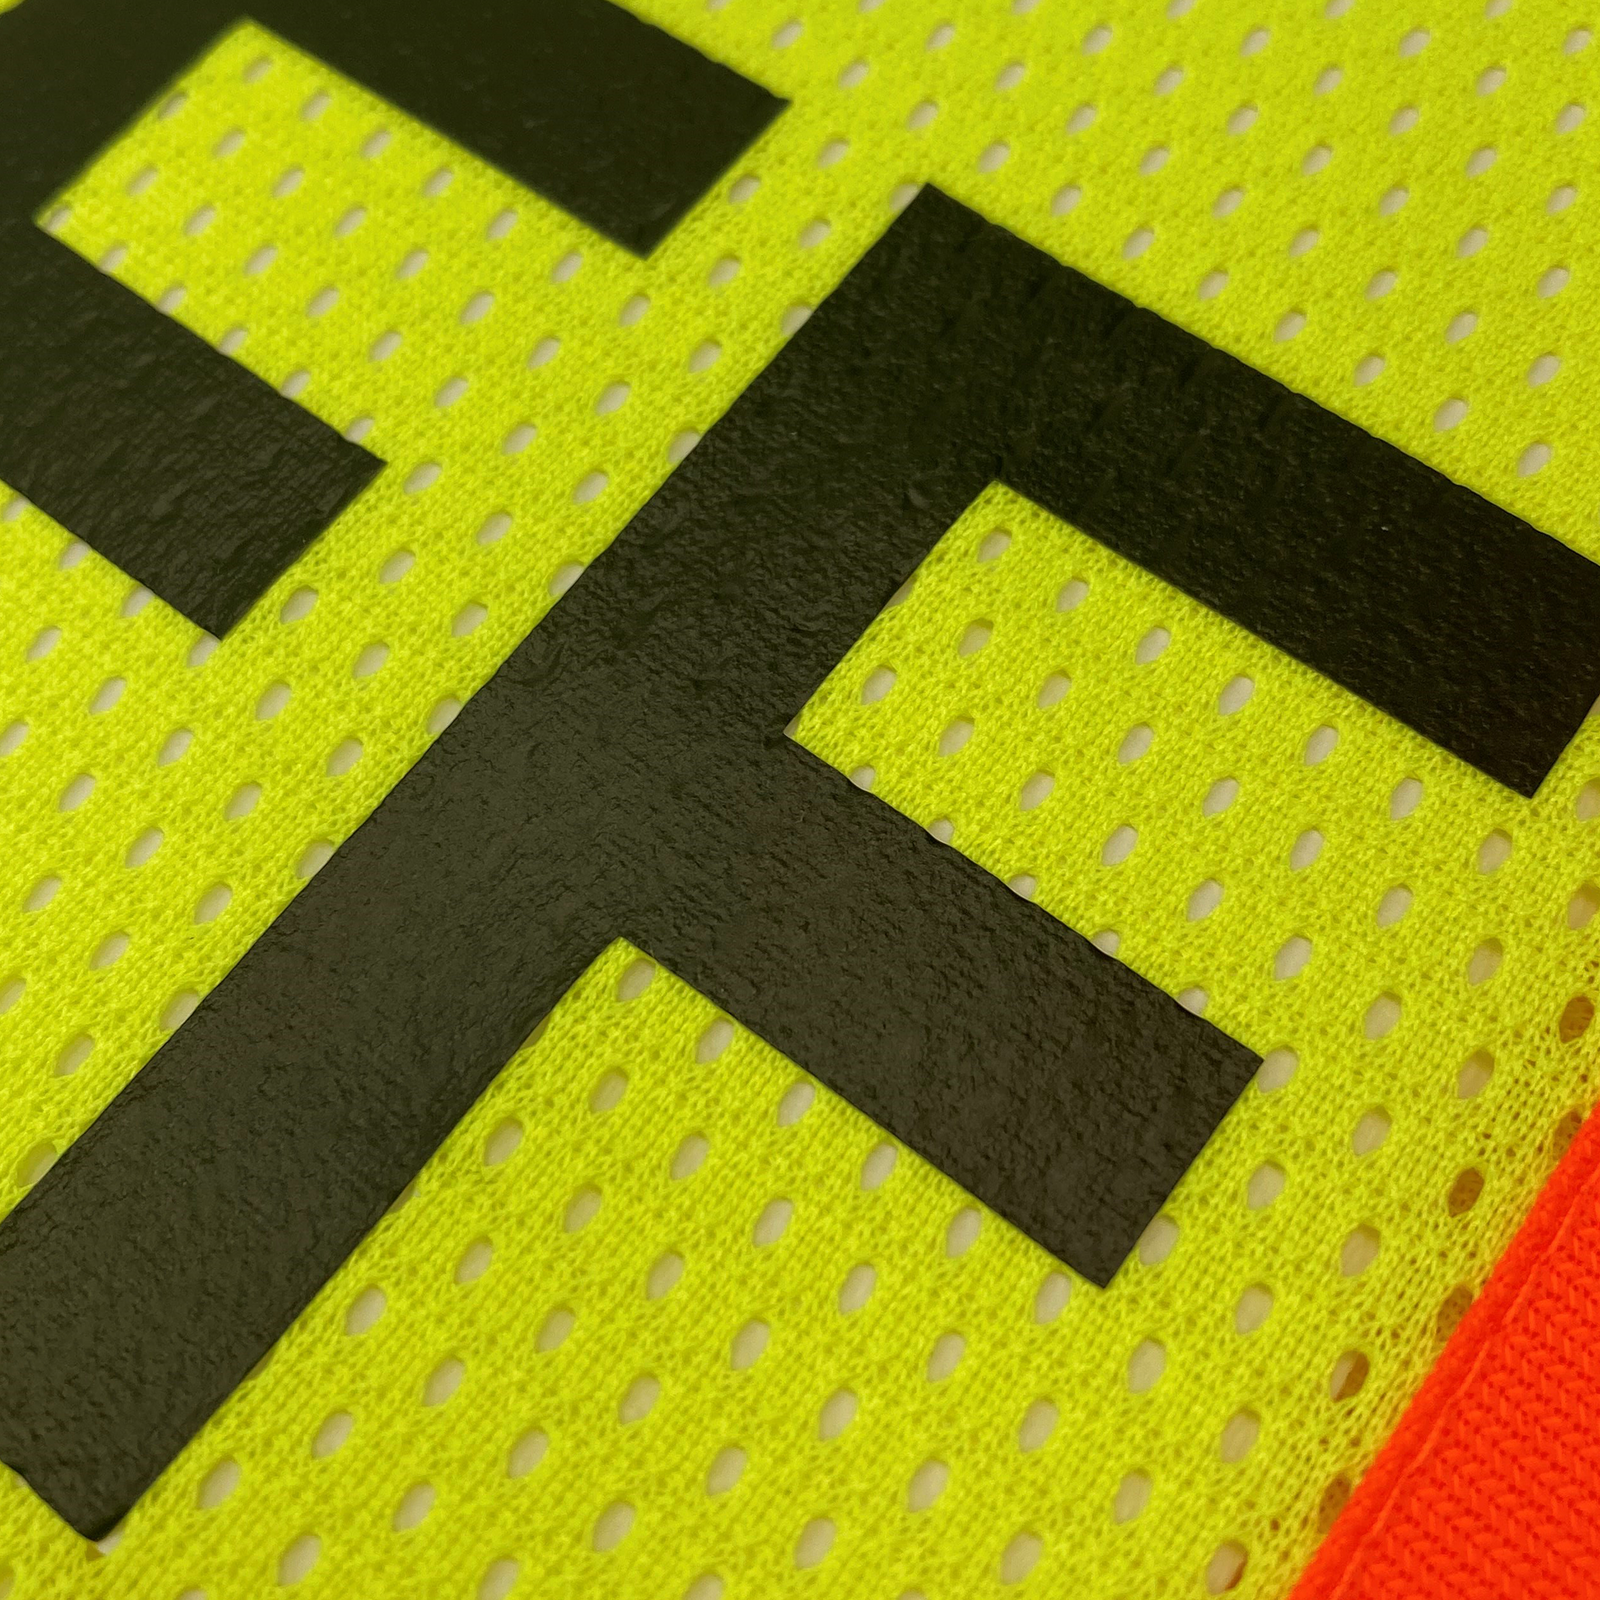 Close up of the yellow safety vest with reflective strips and mesh fabric for Staff workers